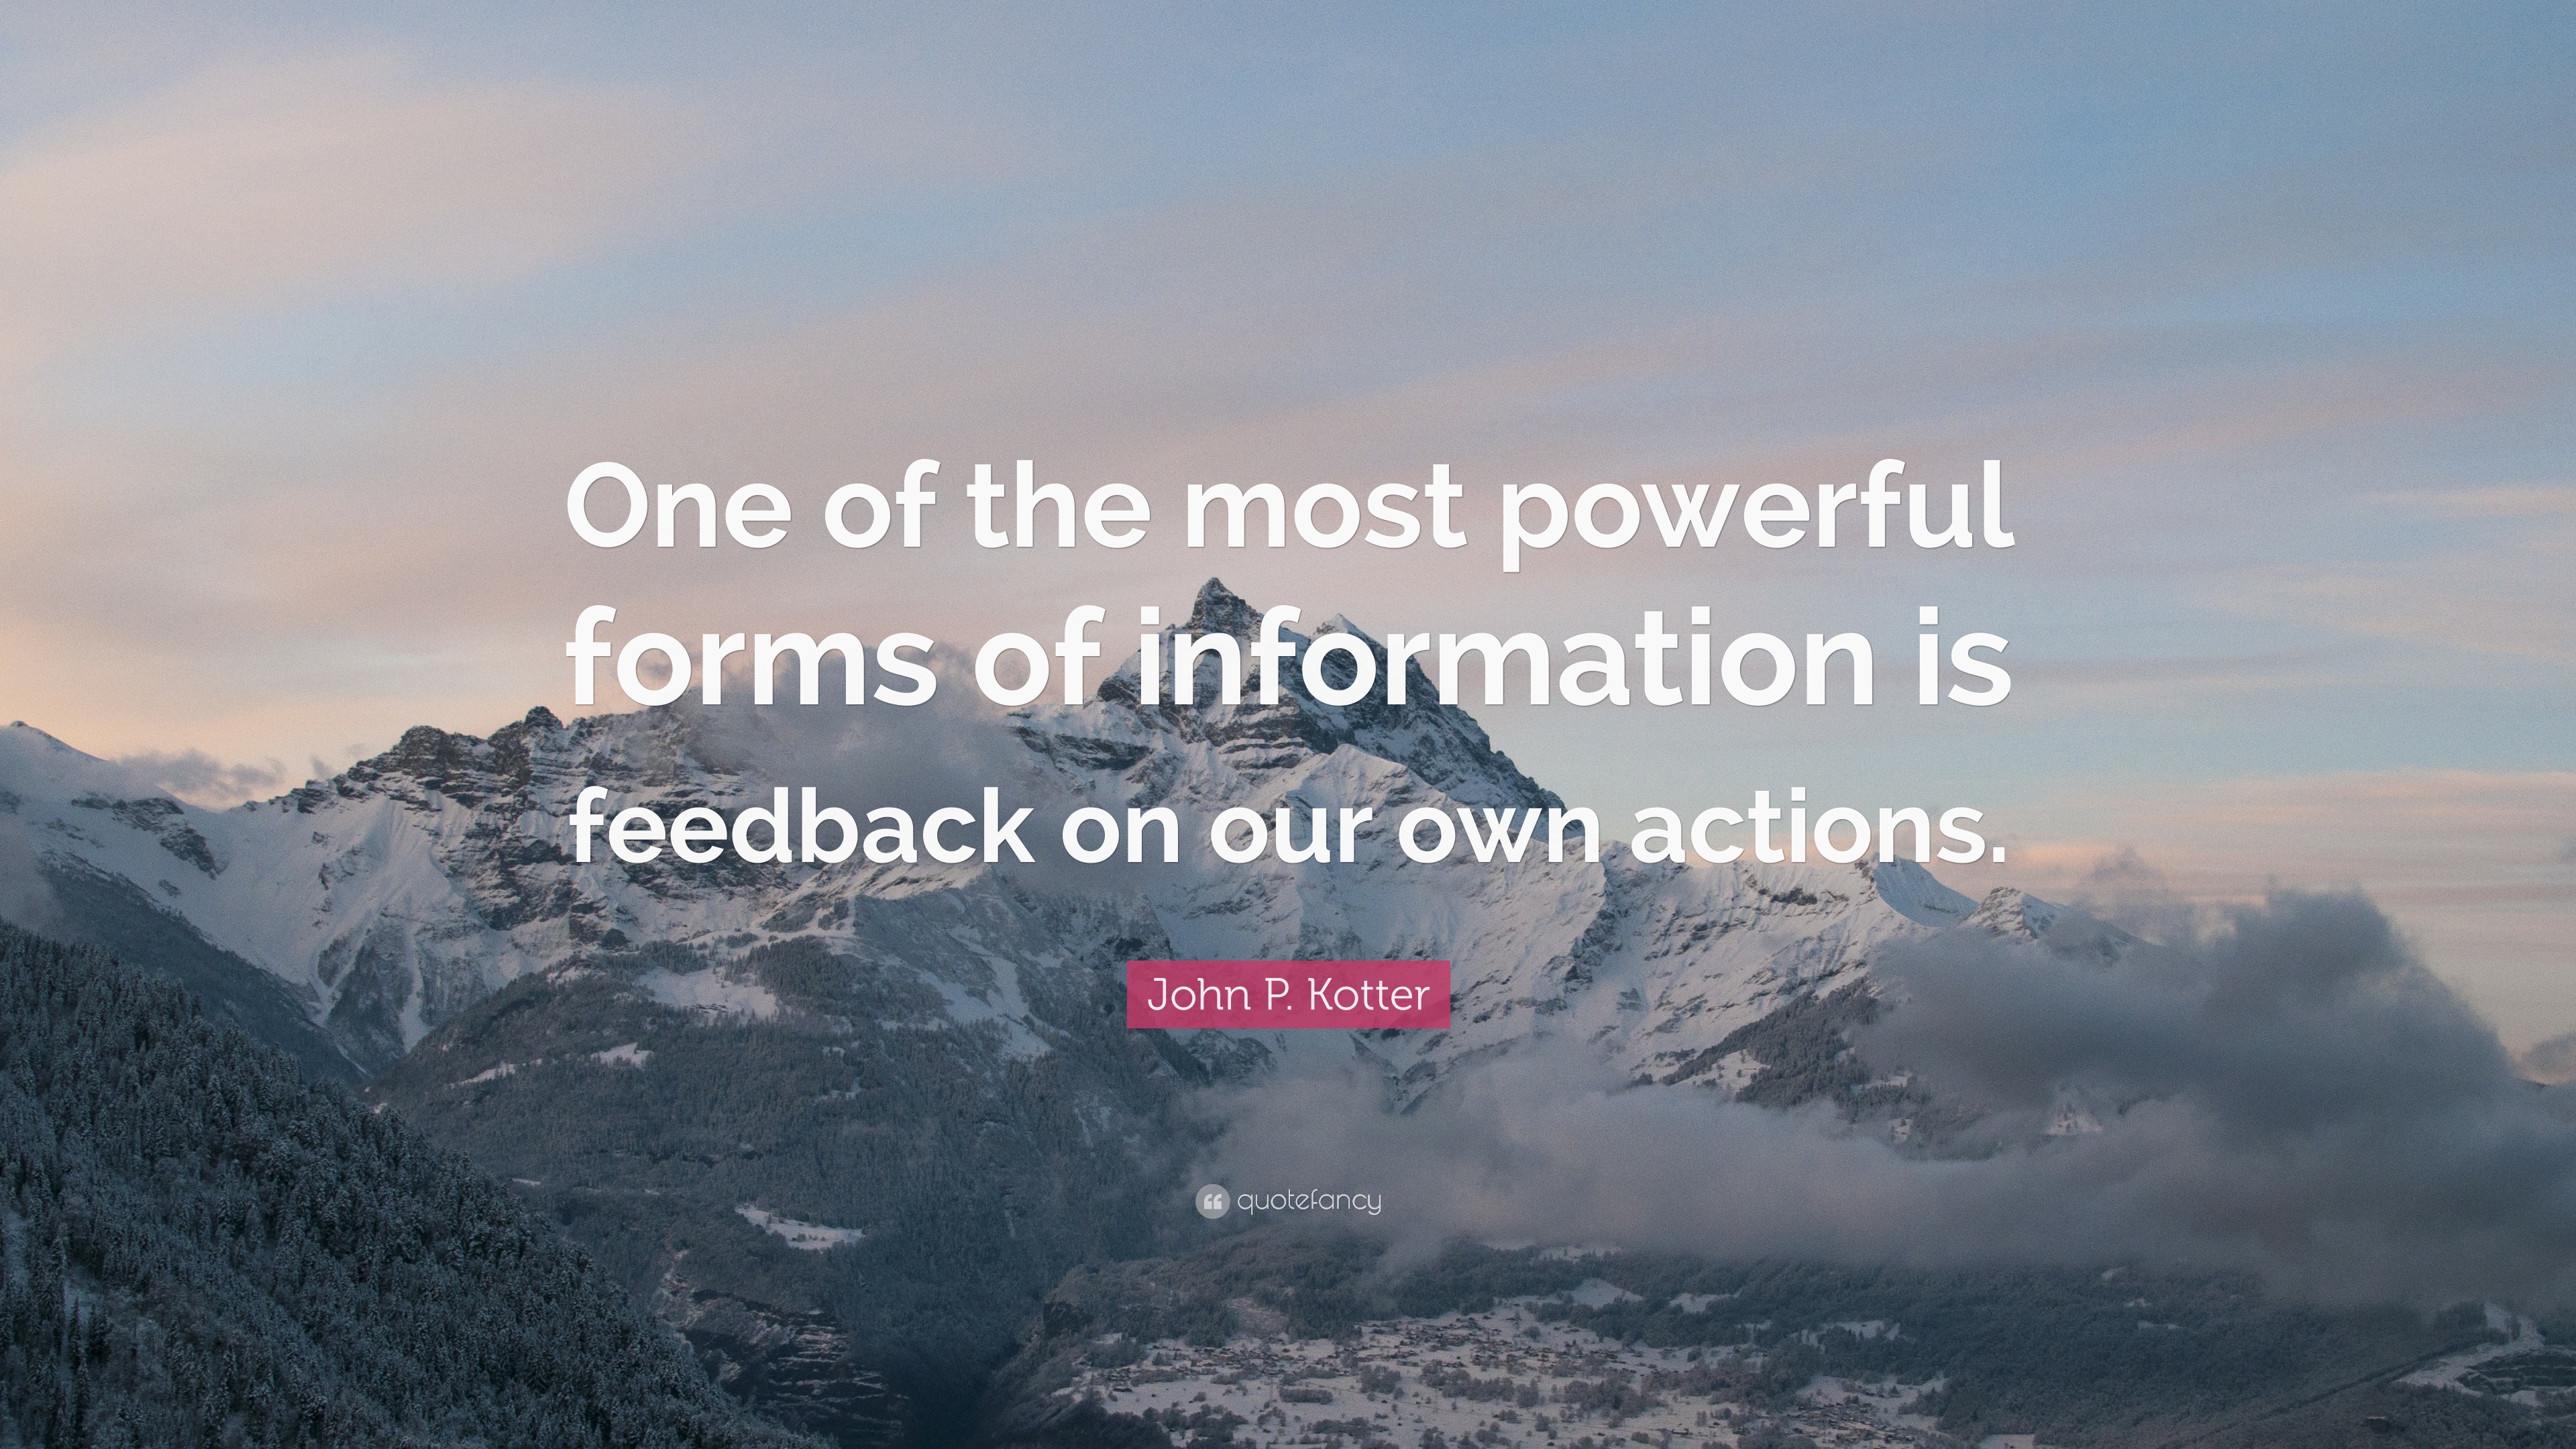 John P. Kotter Quote: “One of the most powerful forms of information is ...